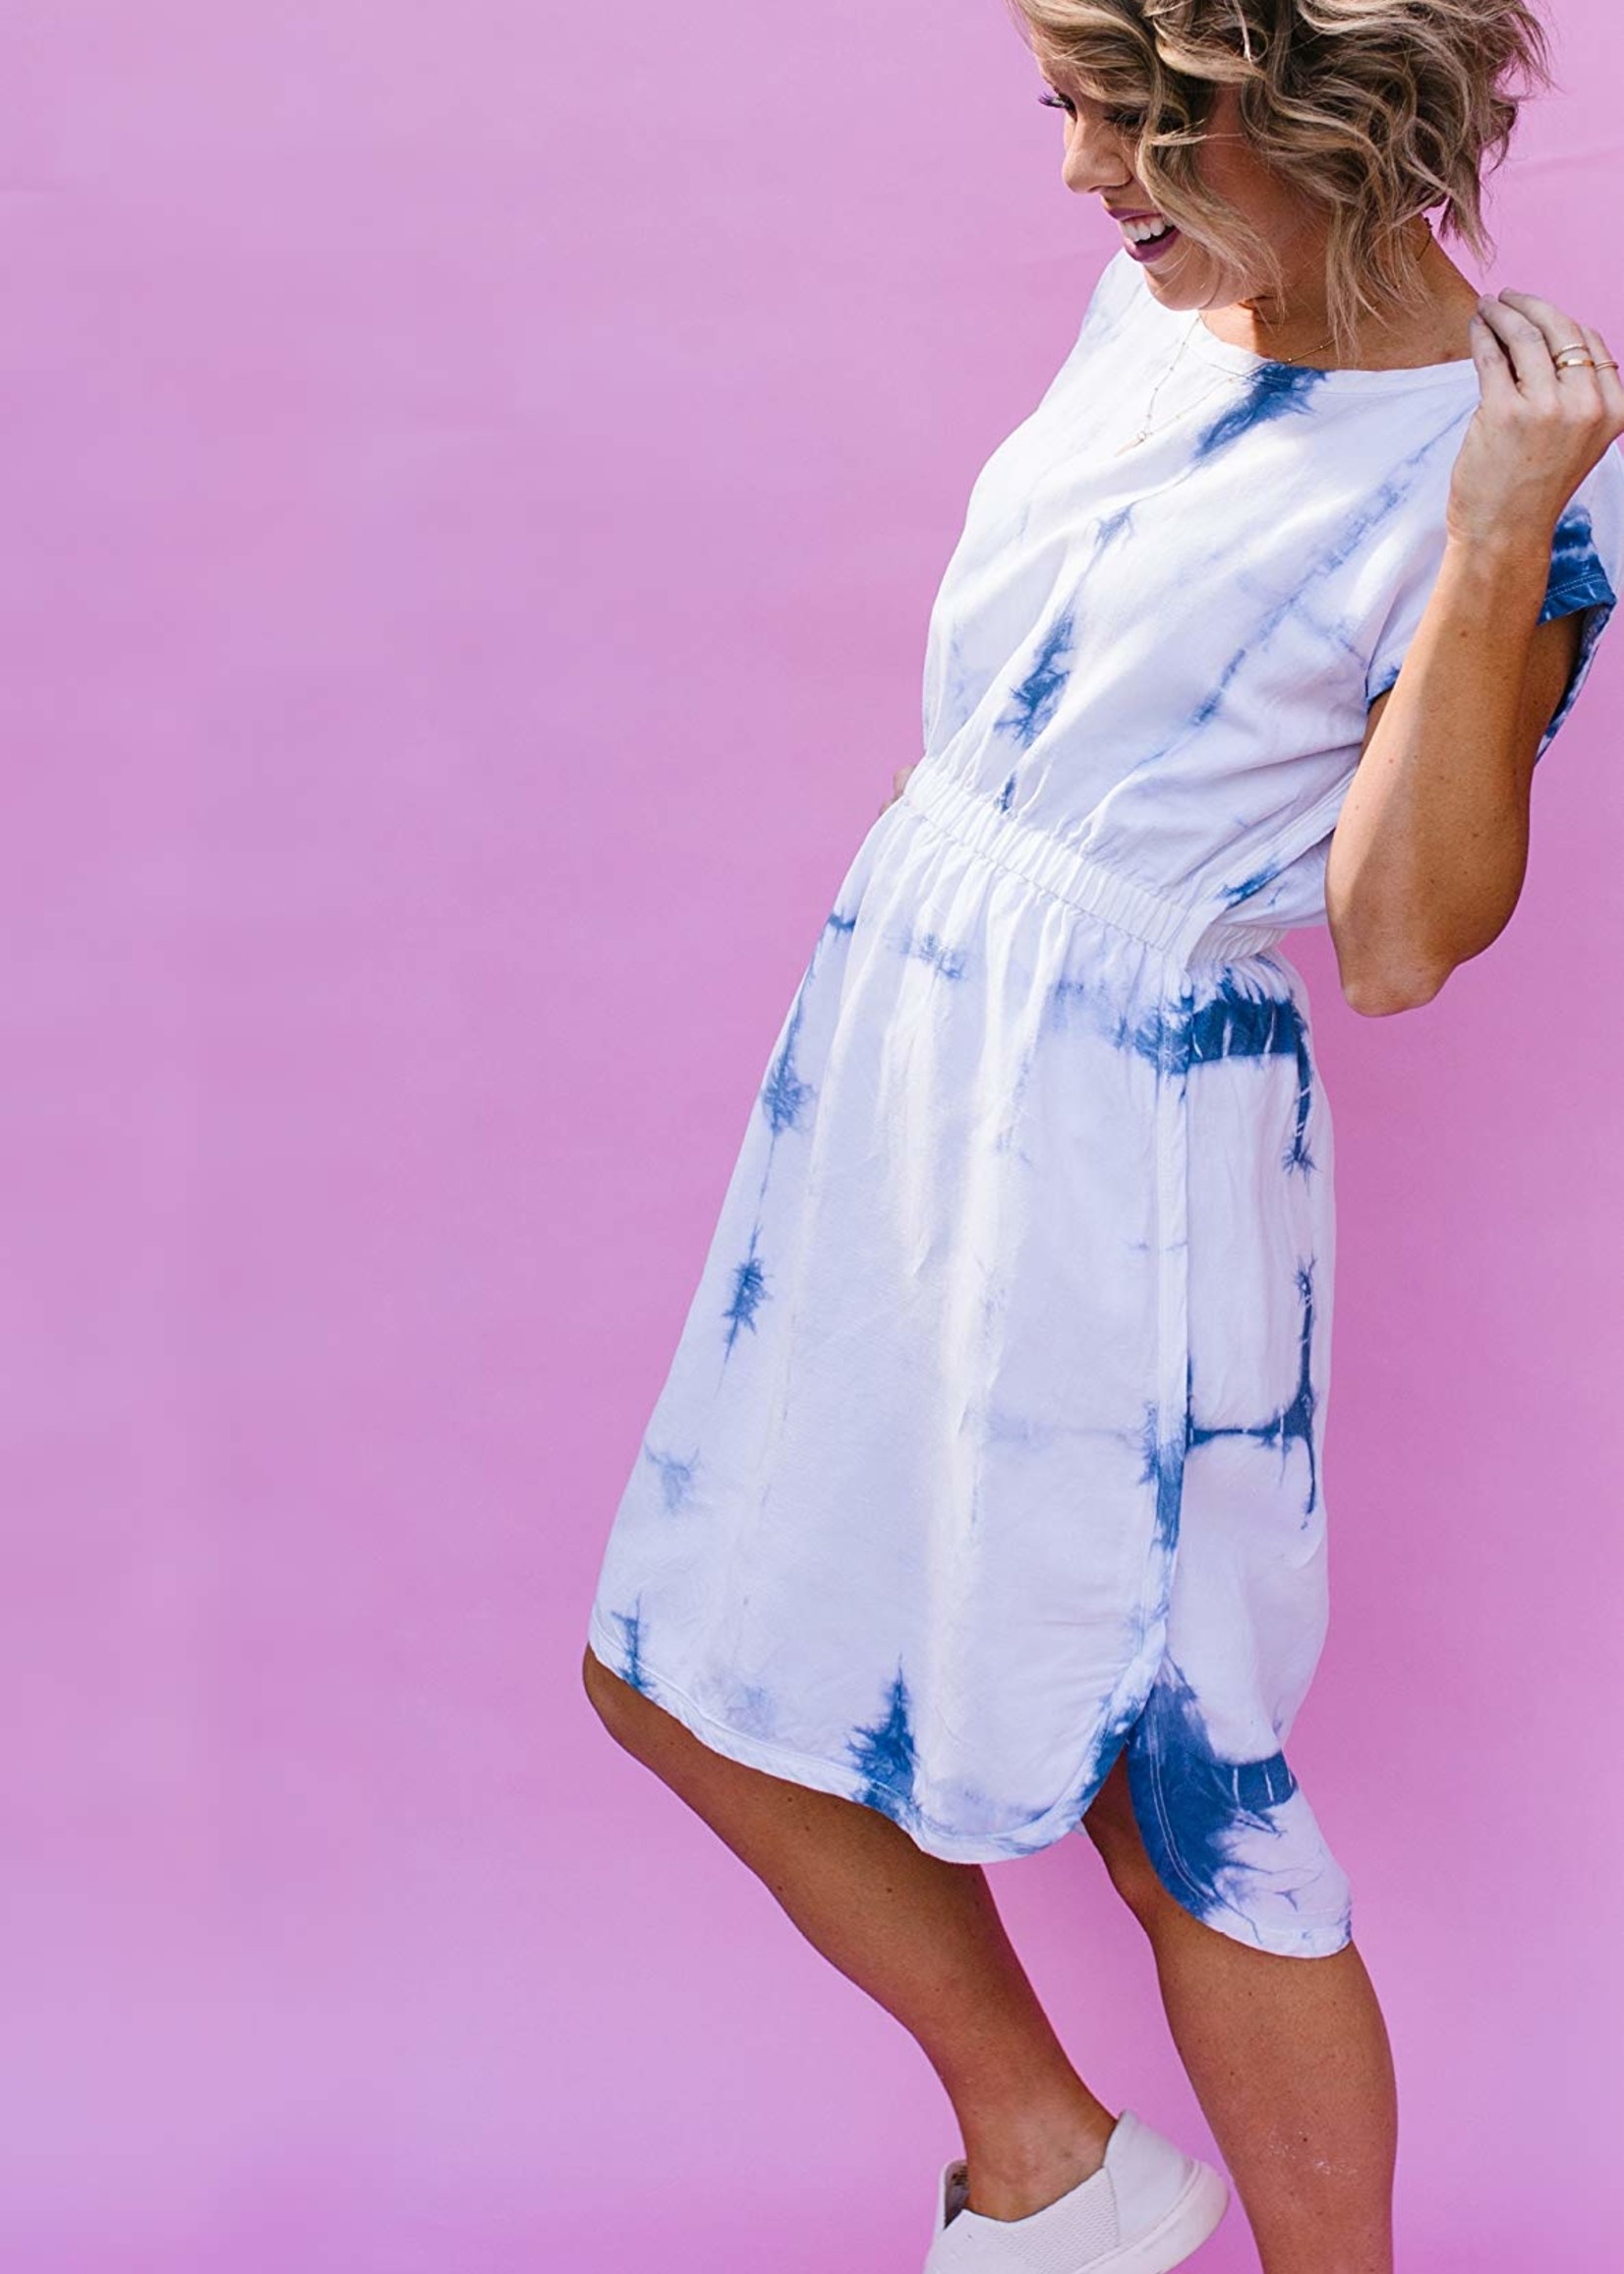 DIY Guide to Tie Dye Style - The Basics and Way Beyond